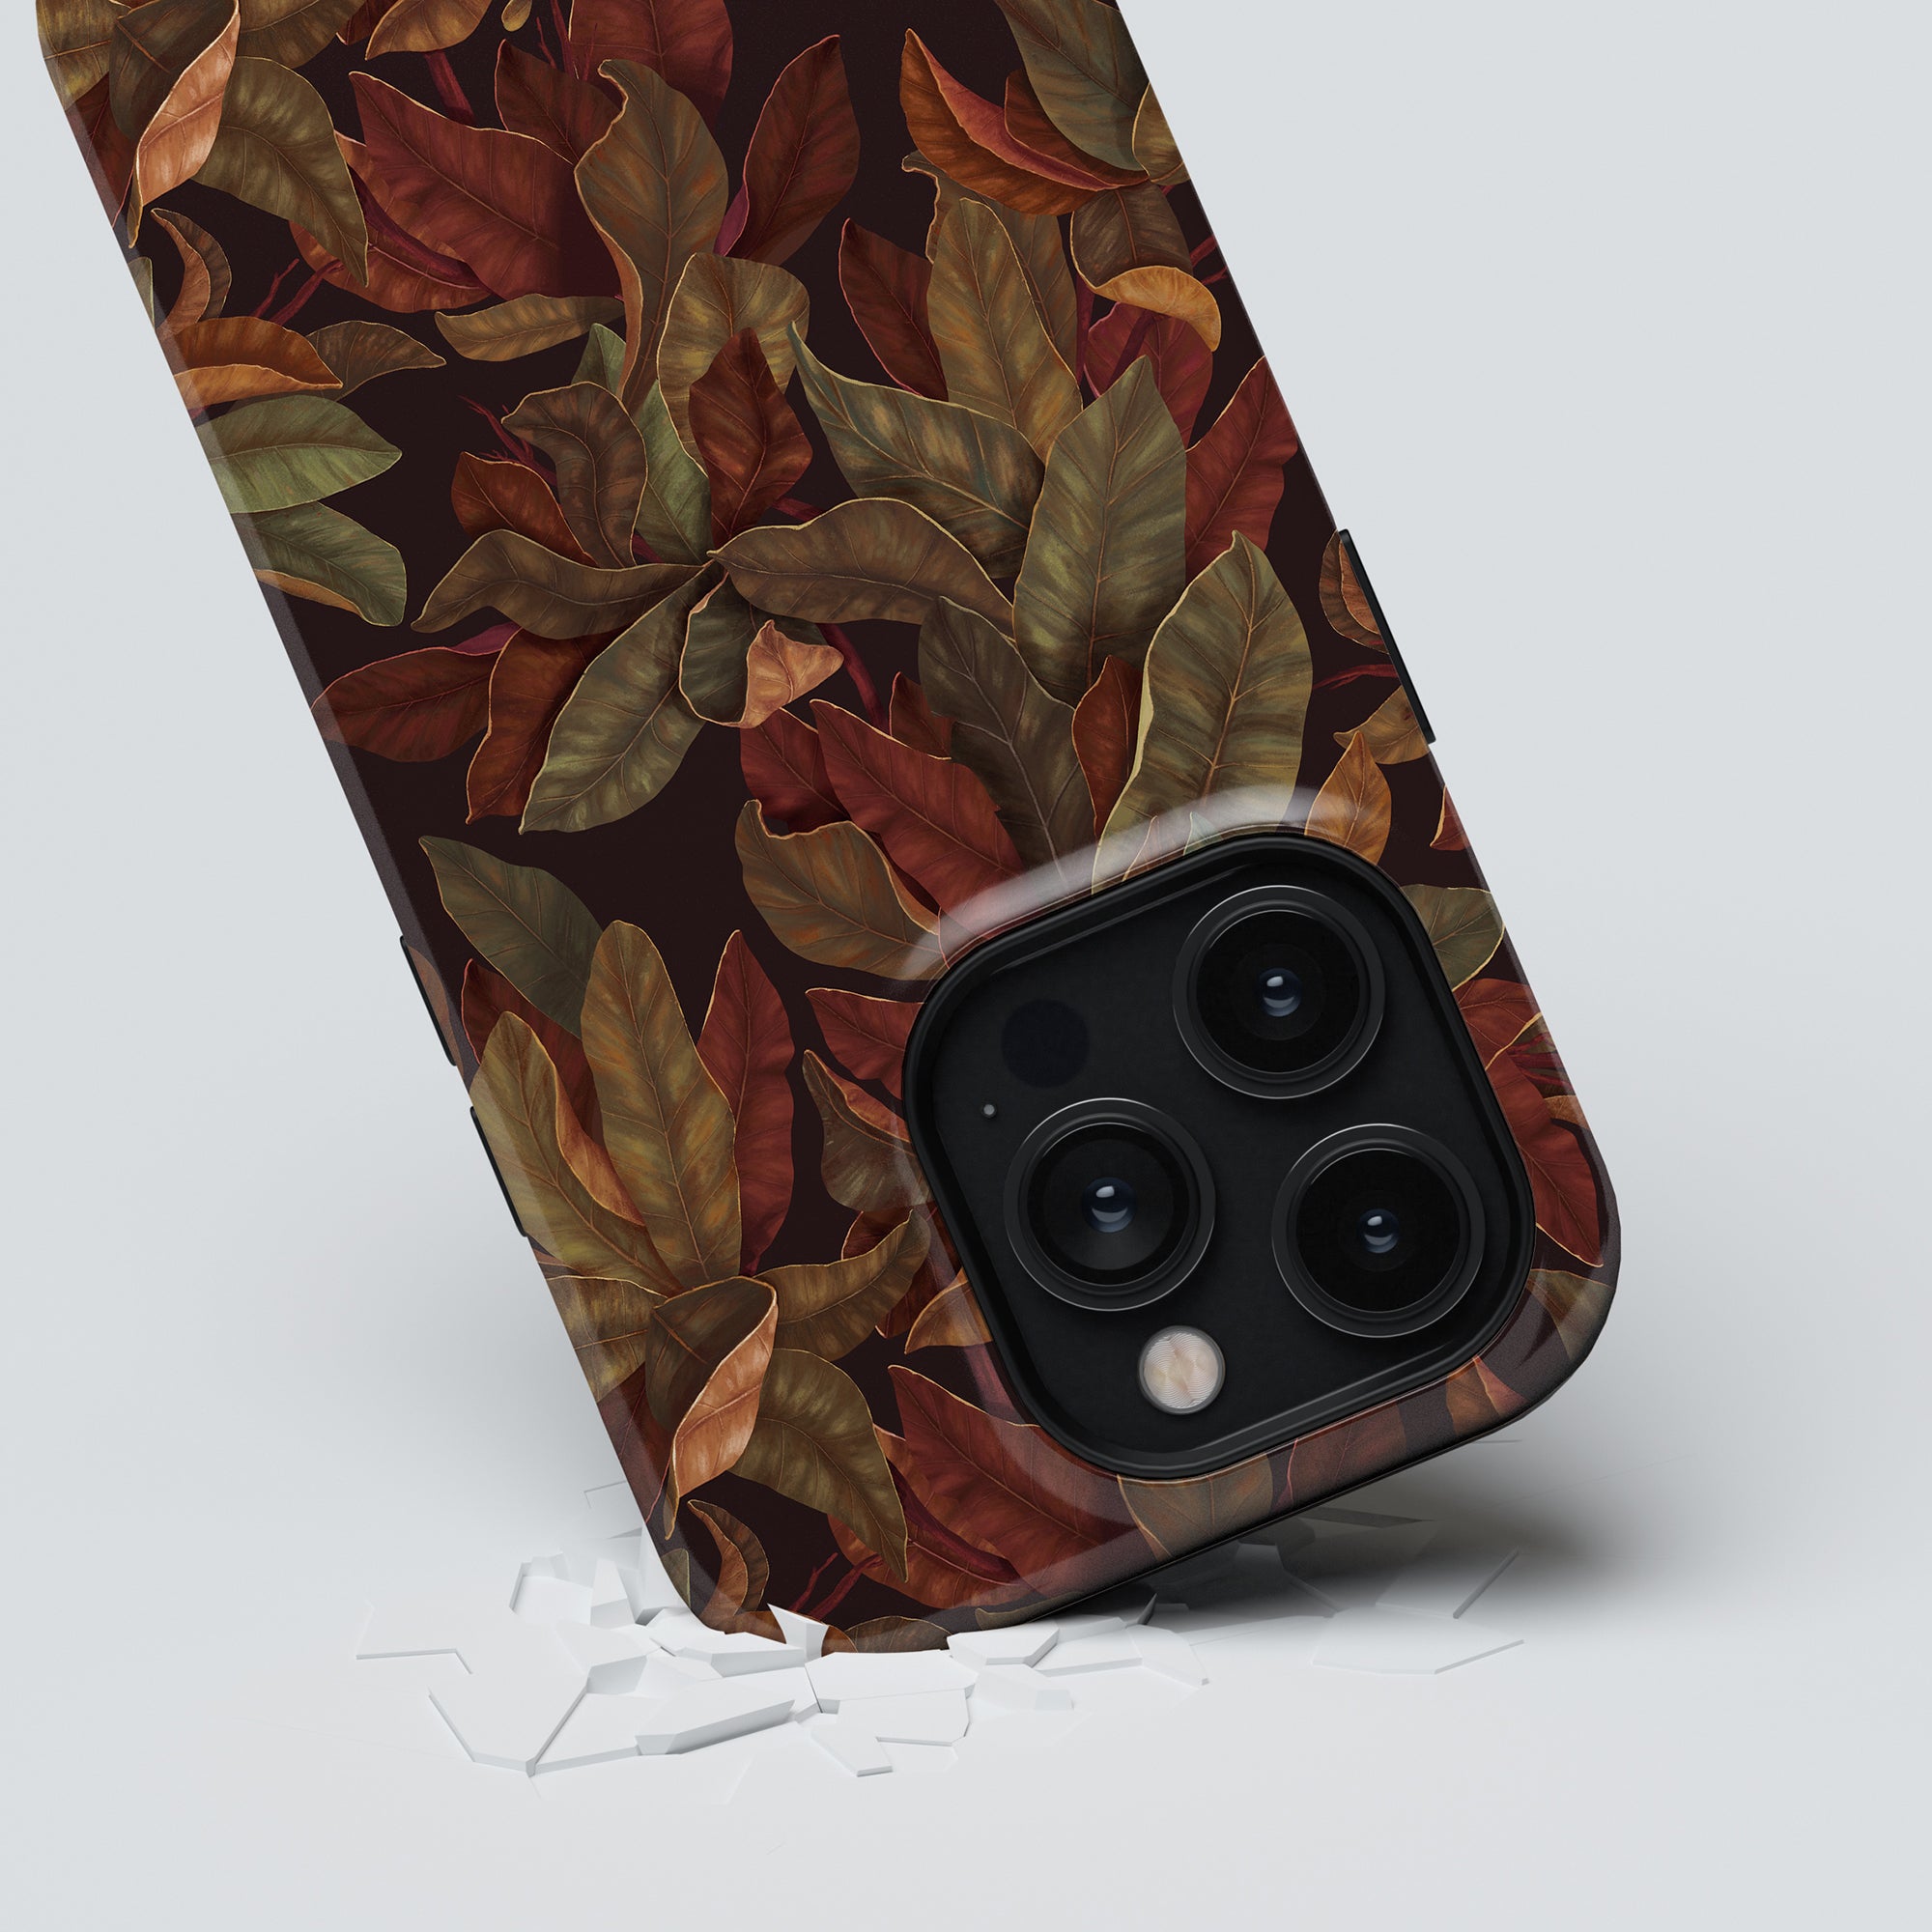 An Autumn - Tough Case adorned with delicate leaves, offering both protection and a natural touch to your device.